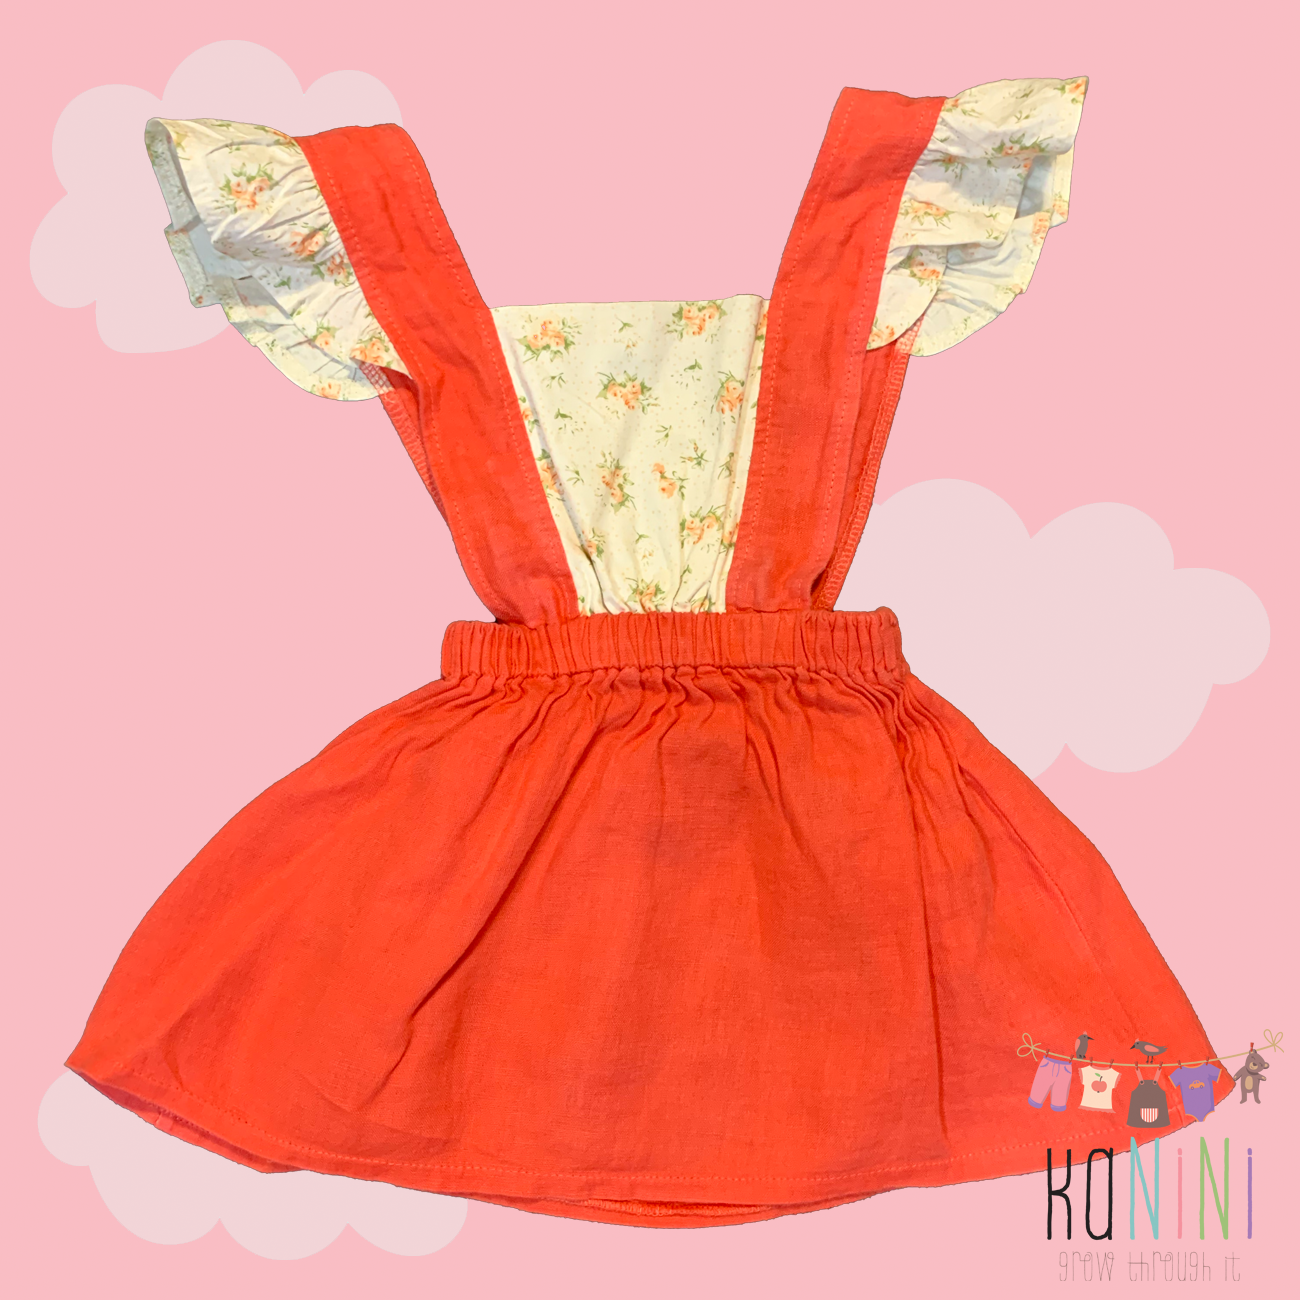 Featured image for “Annapatat 18 - 24 Months Girls Shoulder Frill Dress”